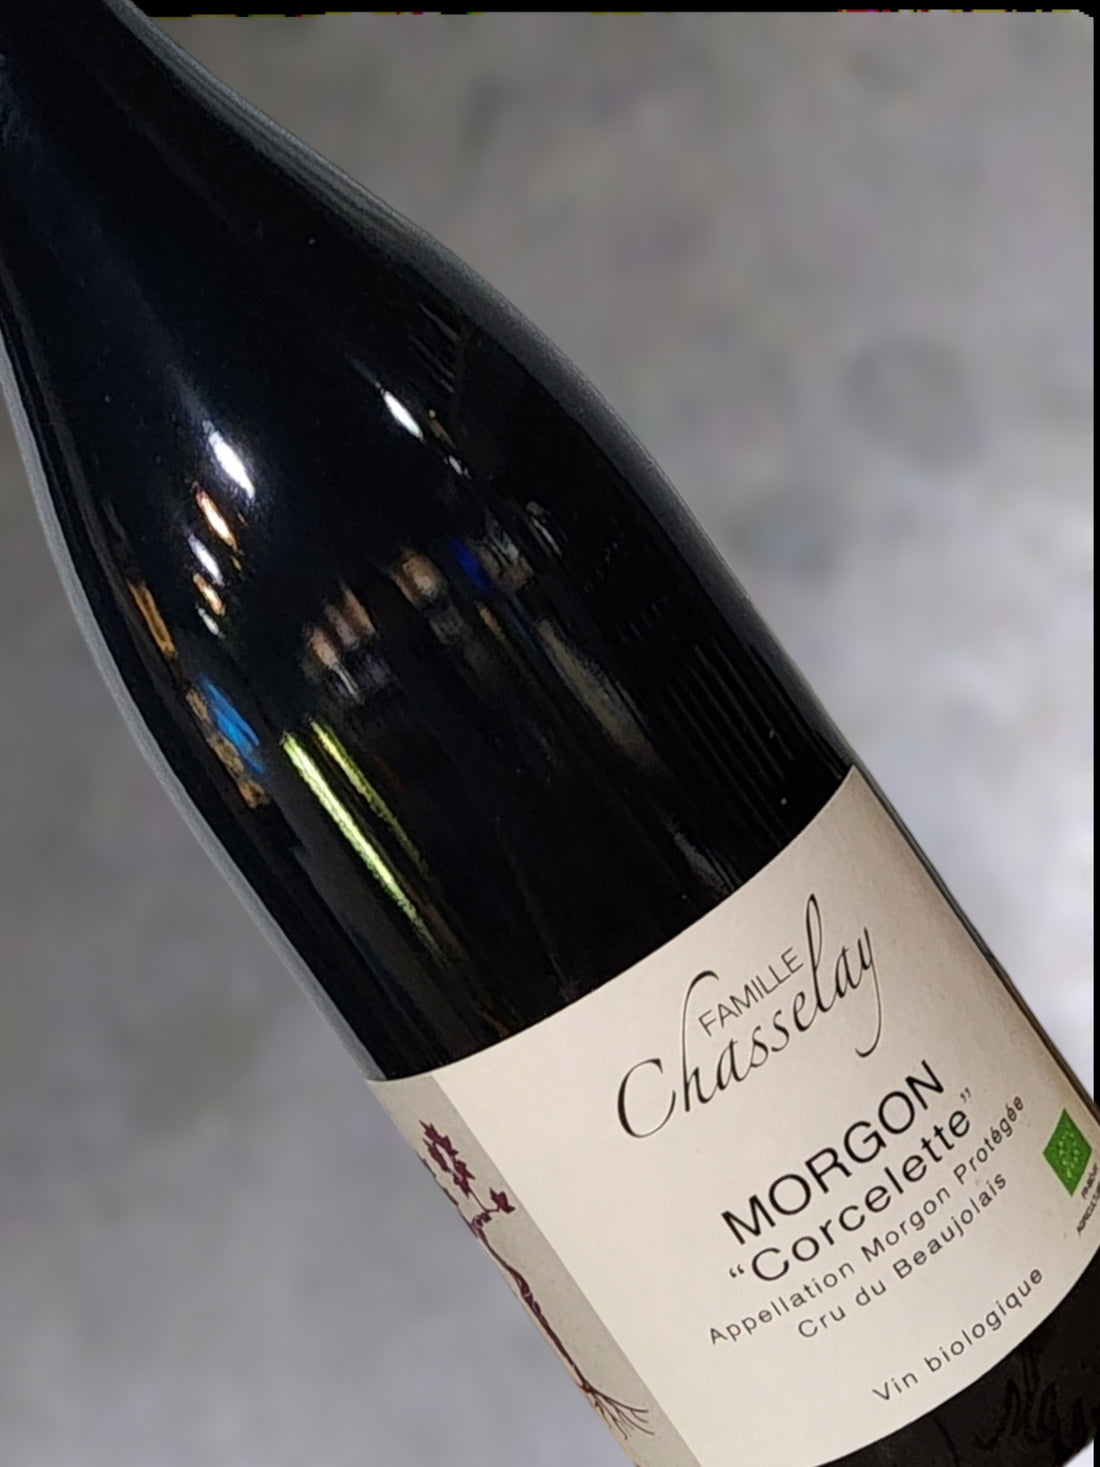 Domaine Chasselay Morgon Corcelette